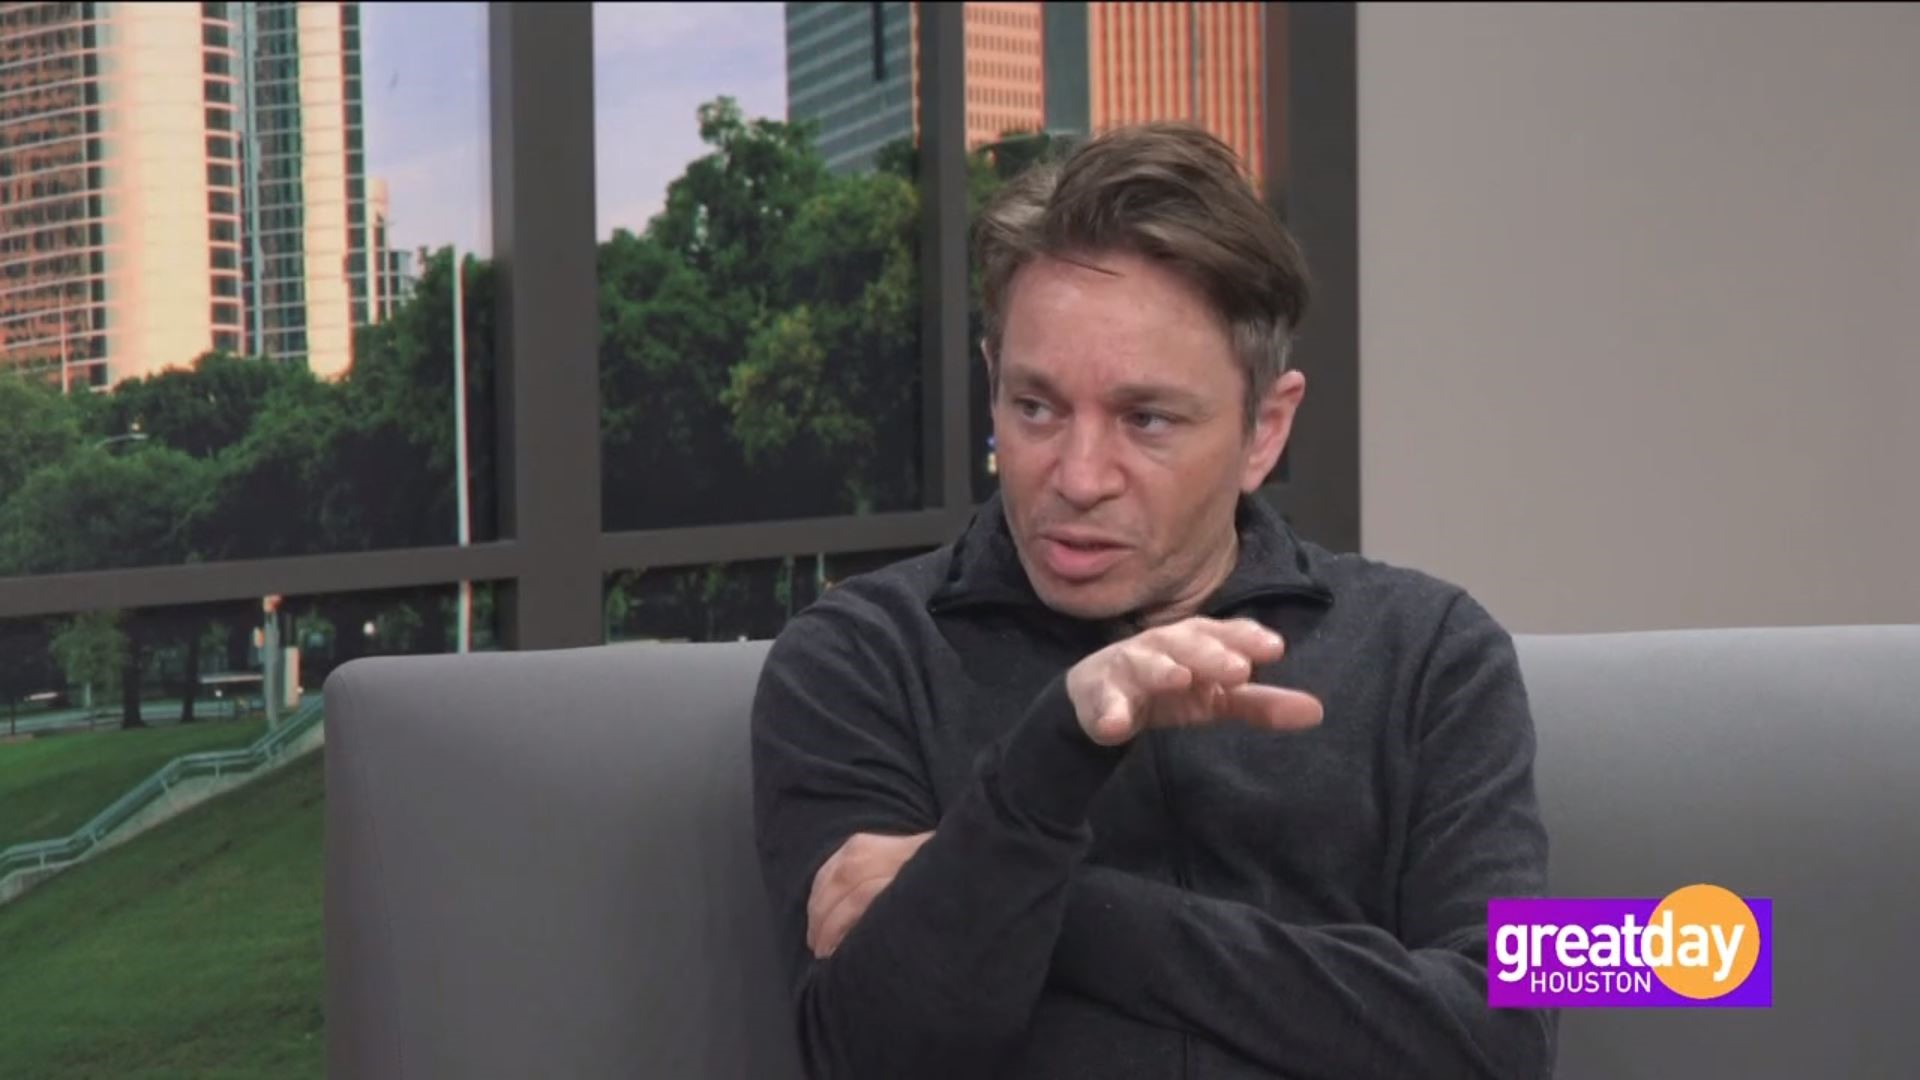 SNL funnyman Chris Kattan talks about his journey from improv actor to SNL Legend.